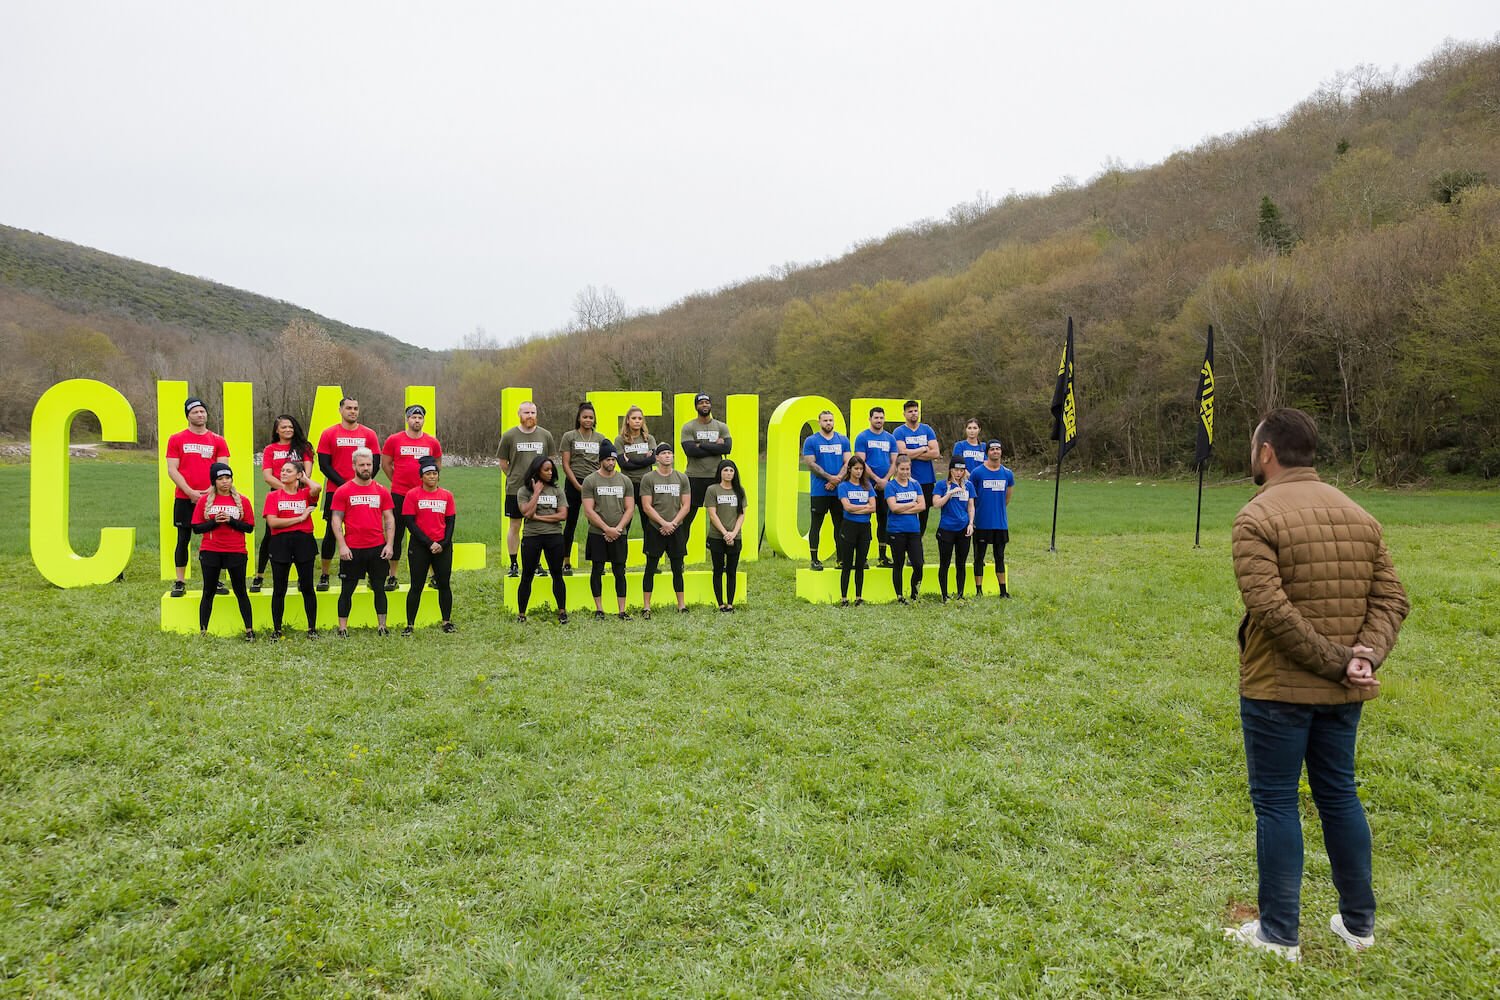 'The Challenge: USA' Season 2 cast members in red, blue, and green teams standing in front of TJ Lavin